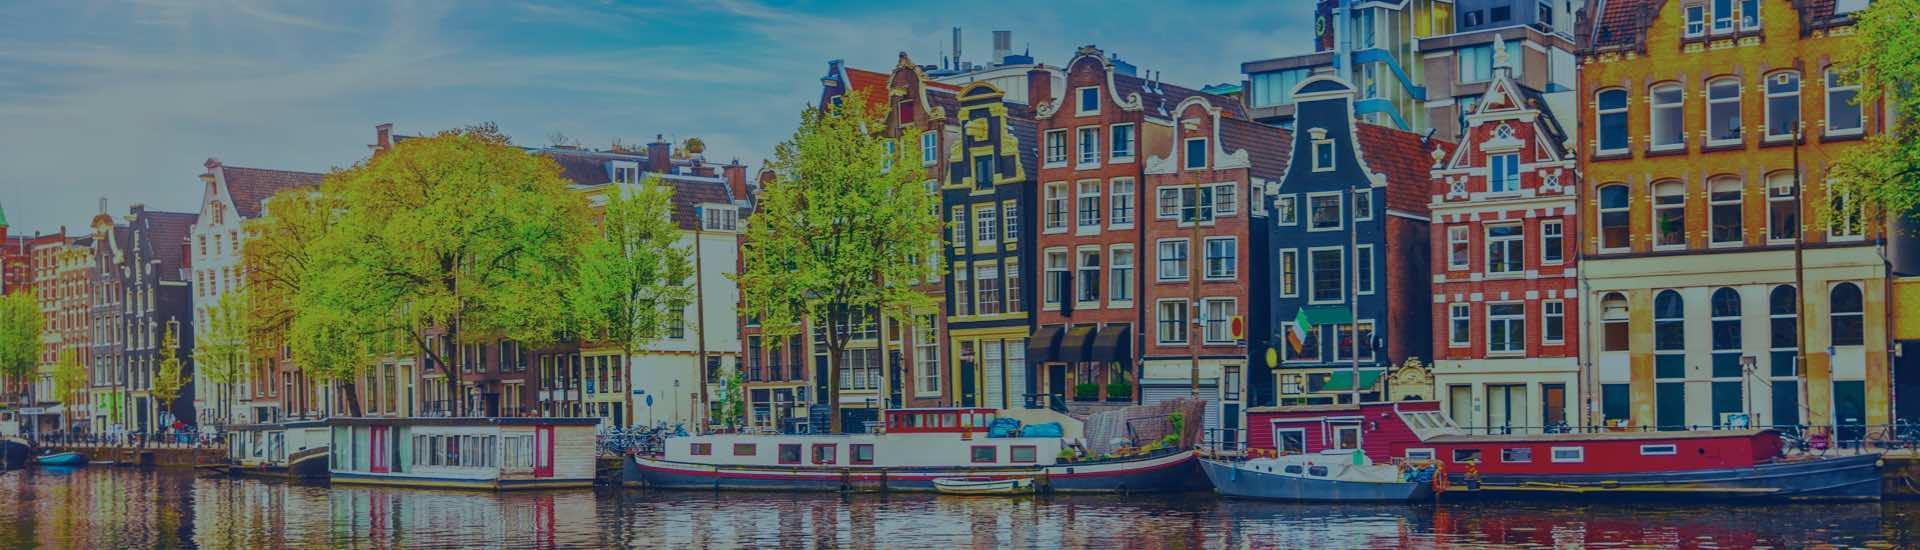 Find the Best Hotels in Amsterdam